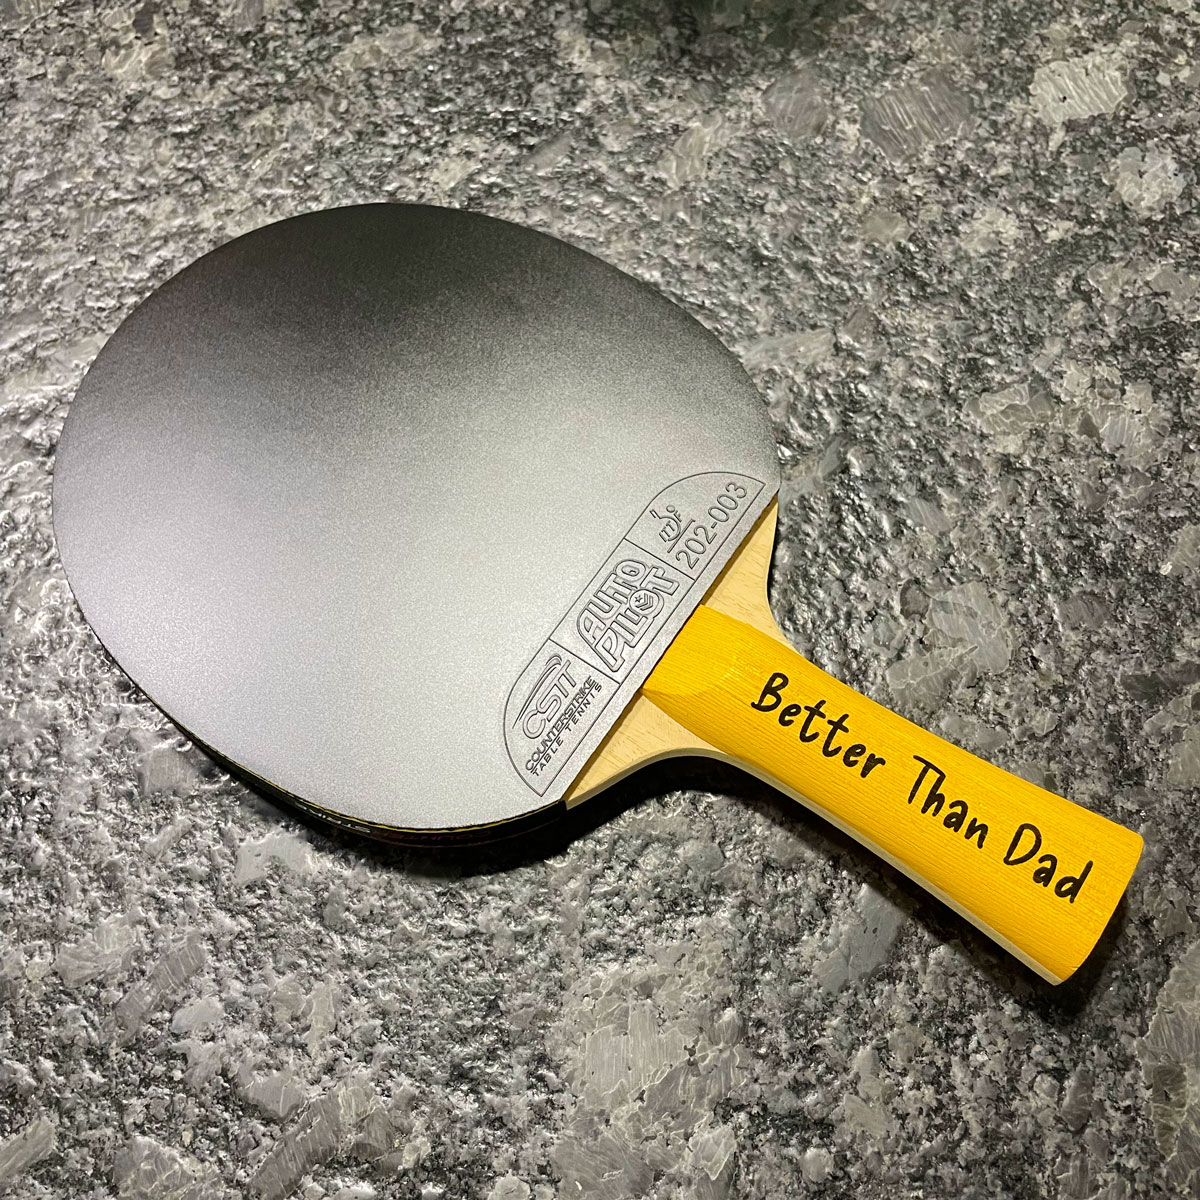 Custom Ping Pong Paddle Create Your Own! CounterStrike Table Tennis